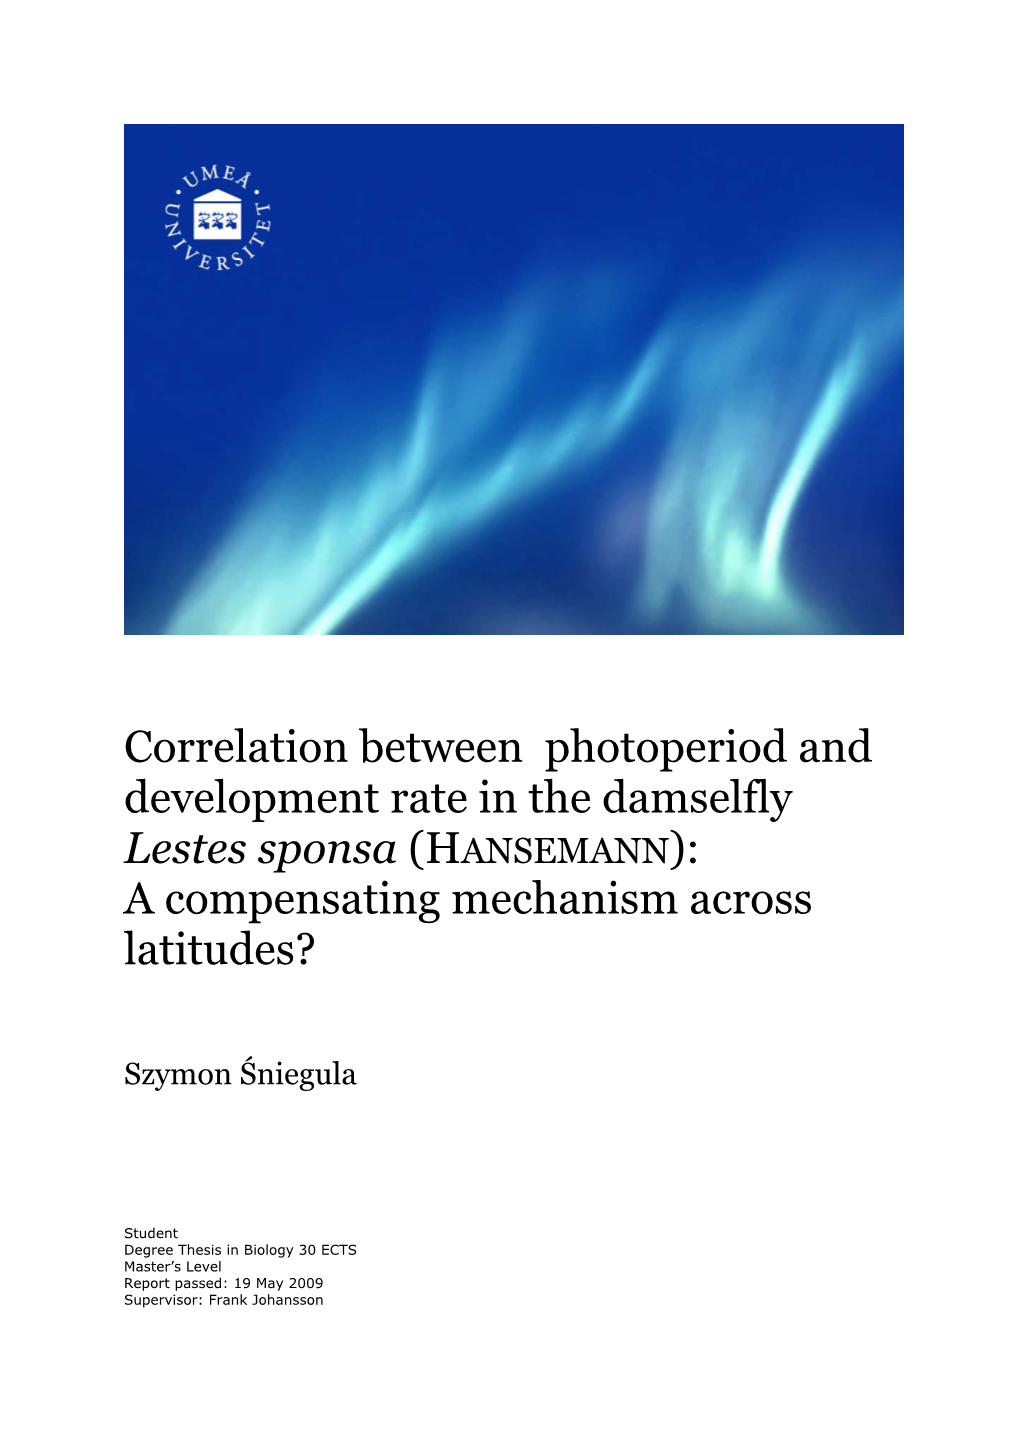 Correlation Between Photoperiod and Development Rate in the Damselfly Lestes Sponsa (HANSEMANN): a Compensating Mechanism Across Latitudes?